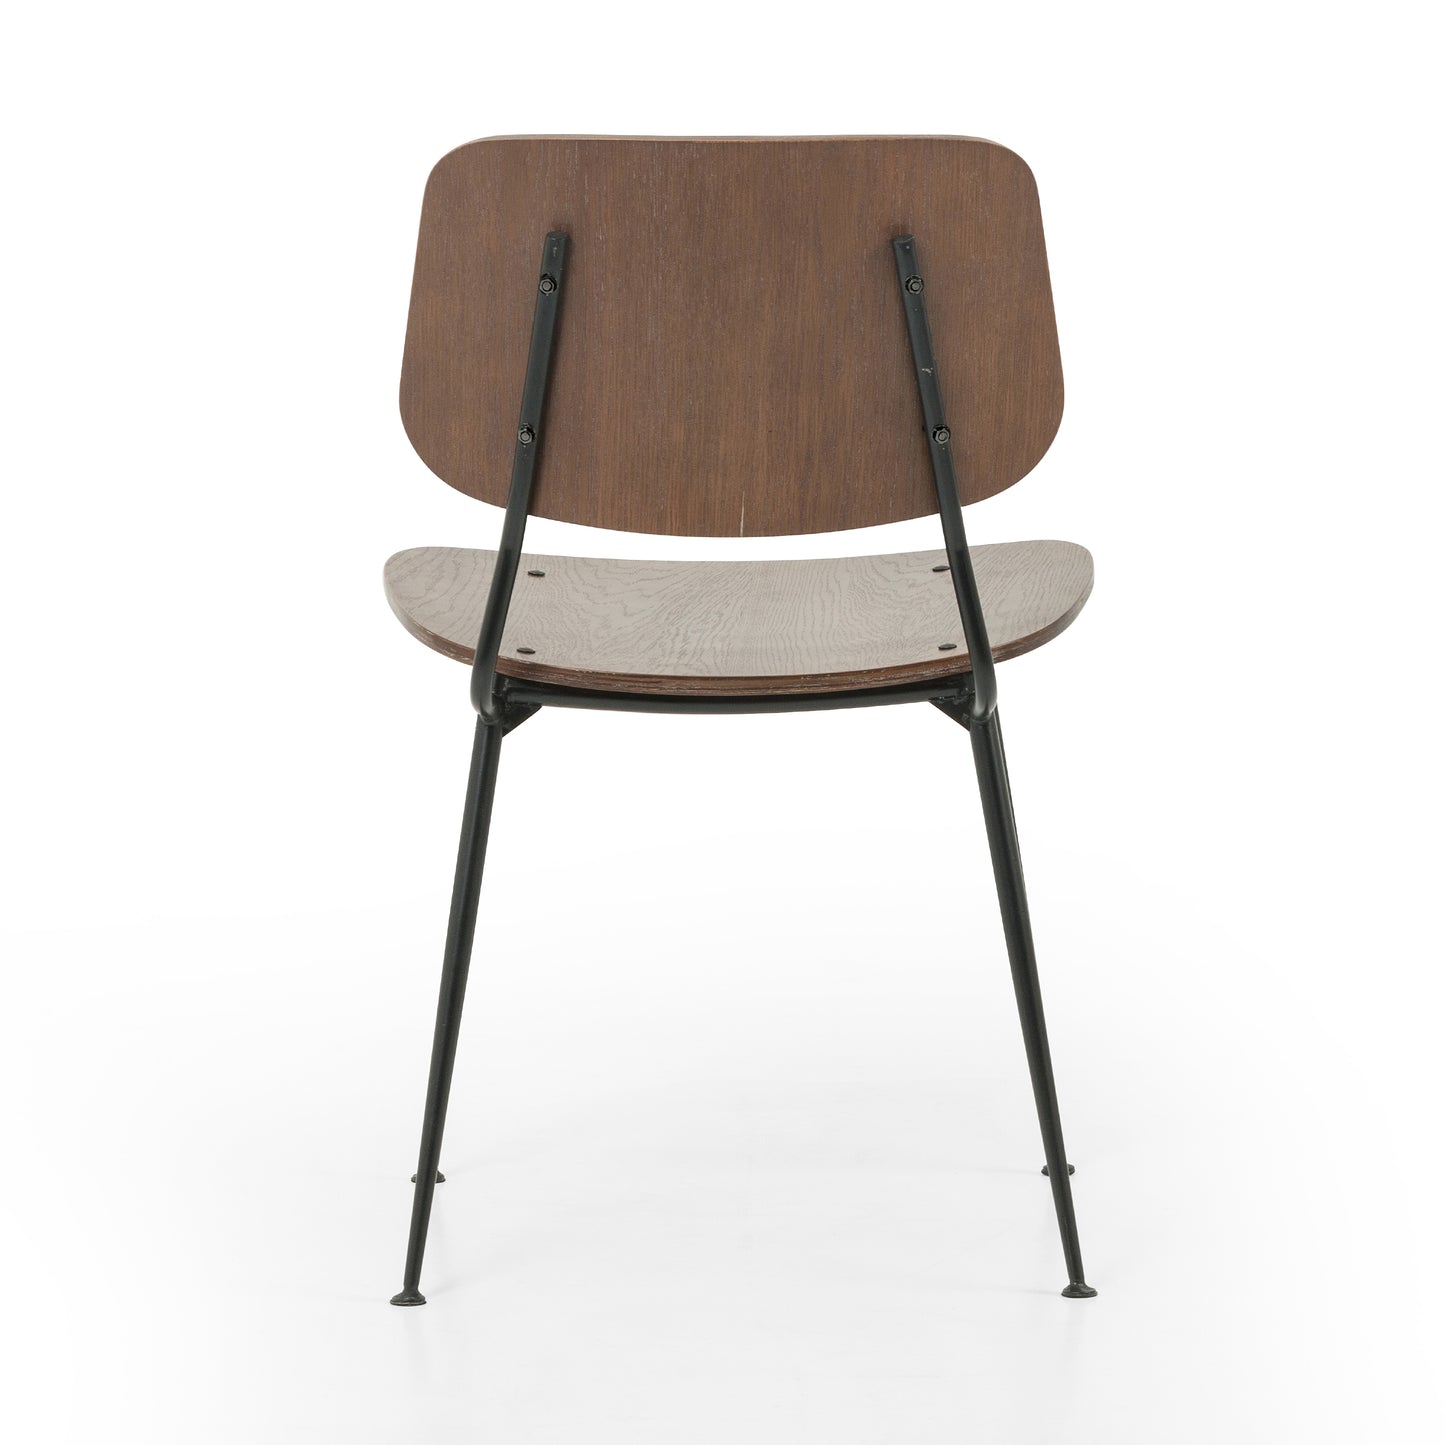 Jared All Wood Dining Chair-Acorn Dining Chair new     Four Hands, Mid Century Modern Furniture, Old Bones Furniture Company, Old Bones Co, Modern Mid Century, Designer Furniture, https://www.oldbonesco.com/